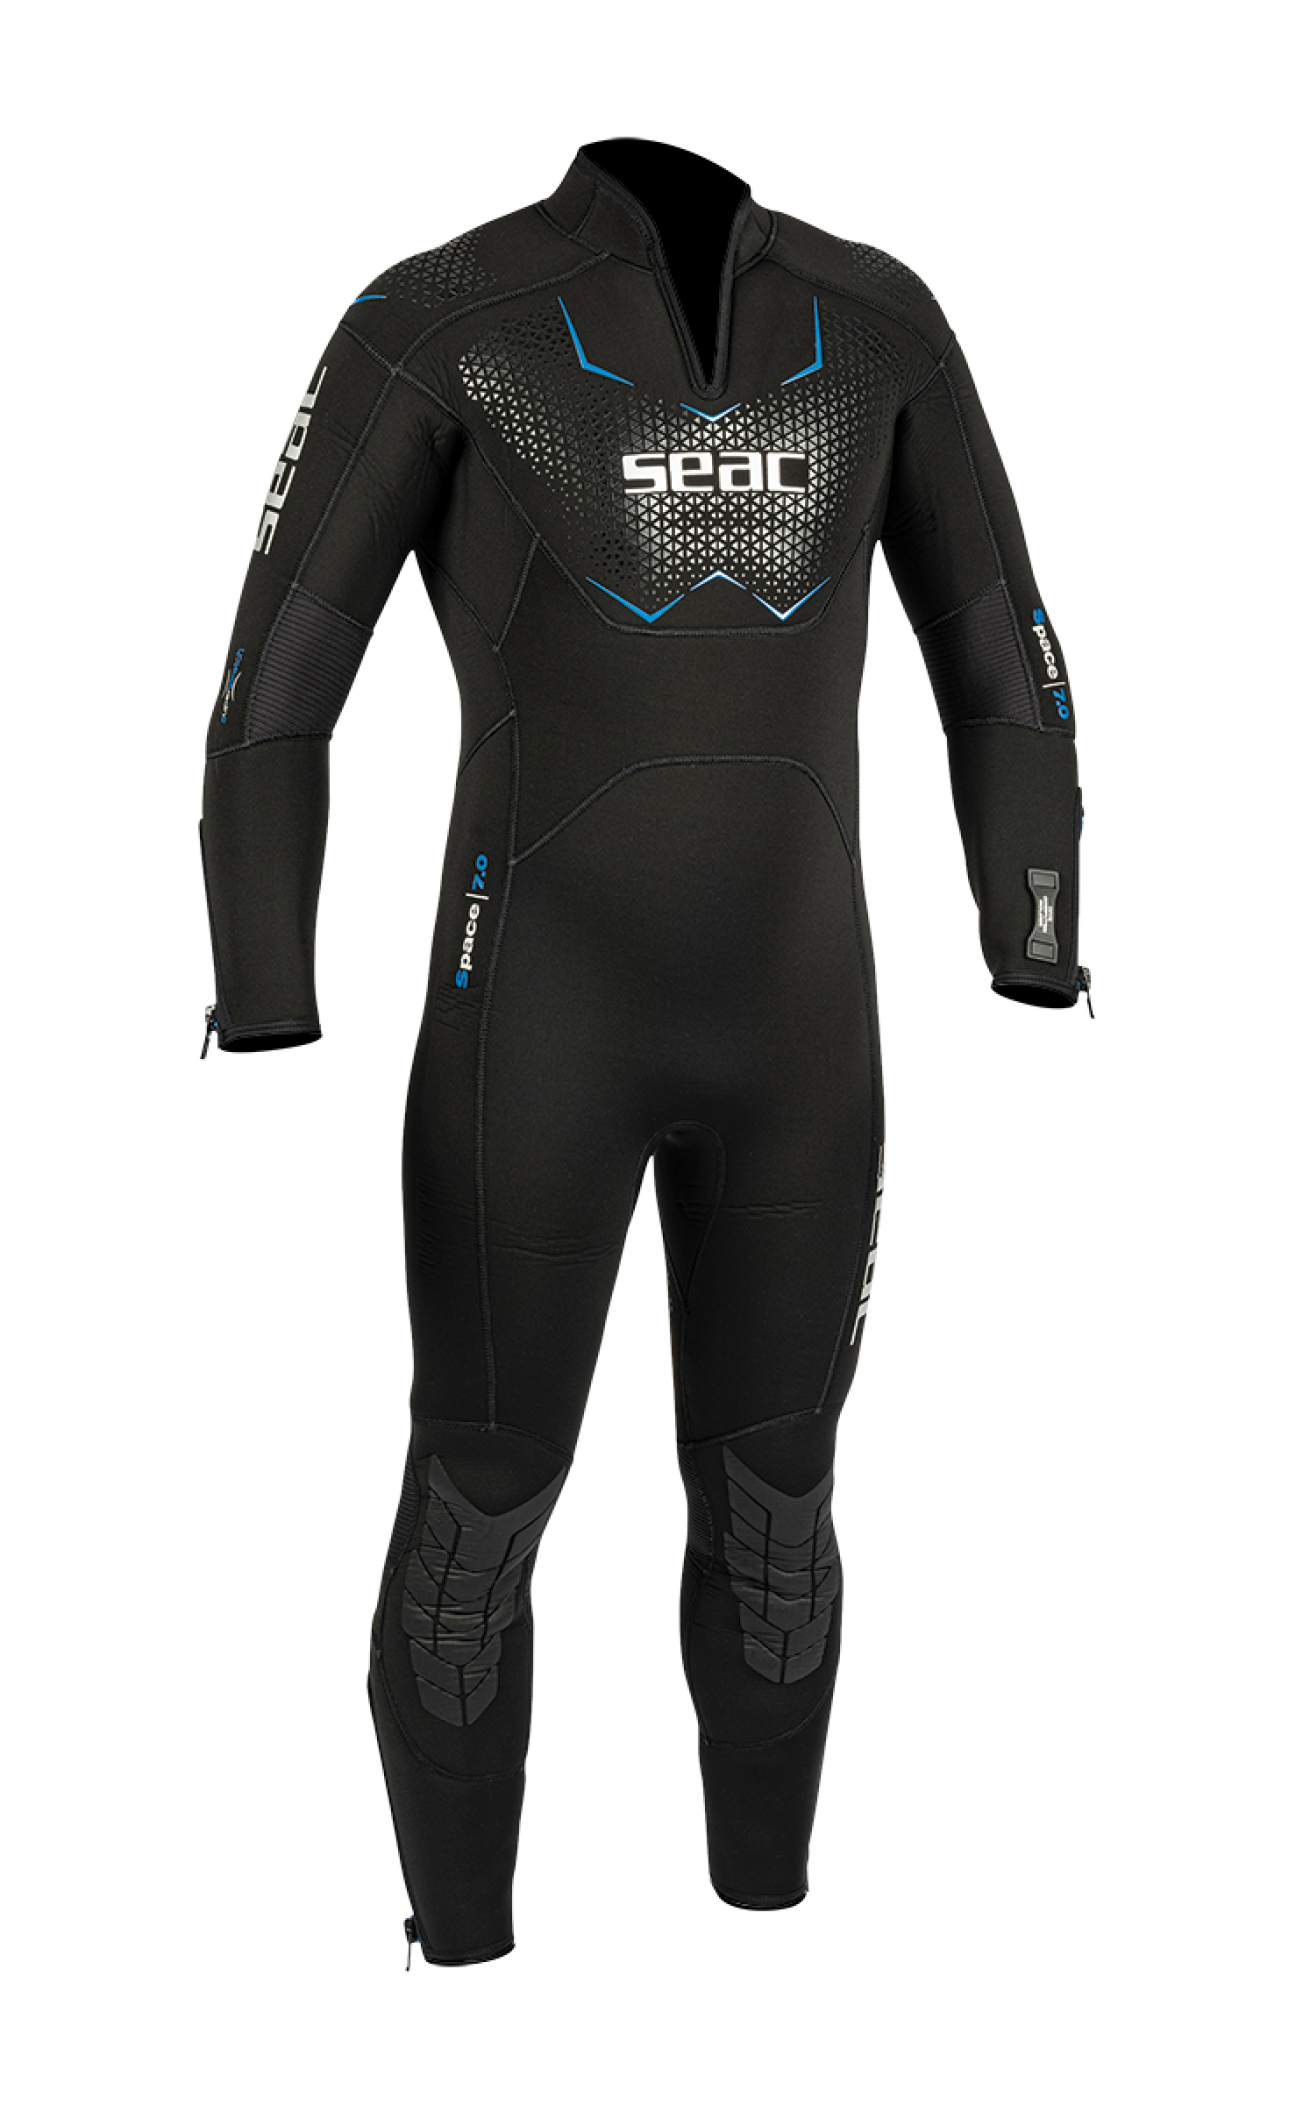 SEAC space 7 wetsuit